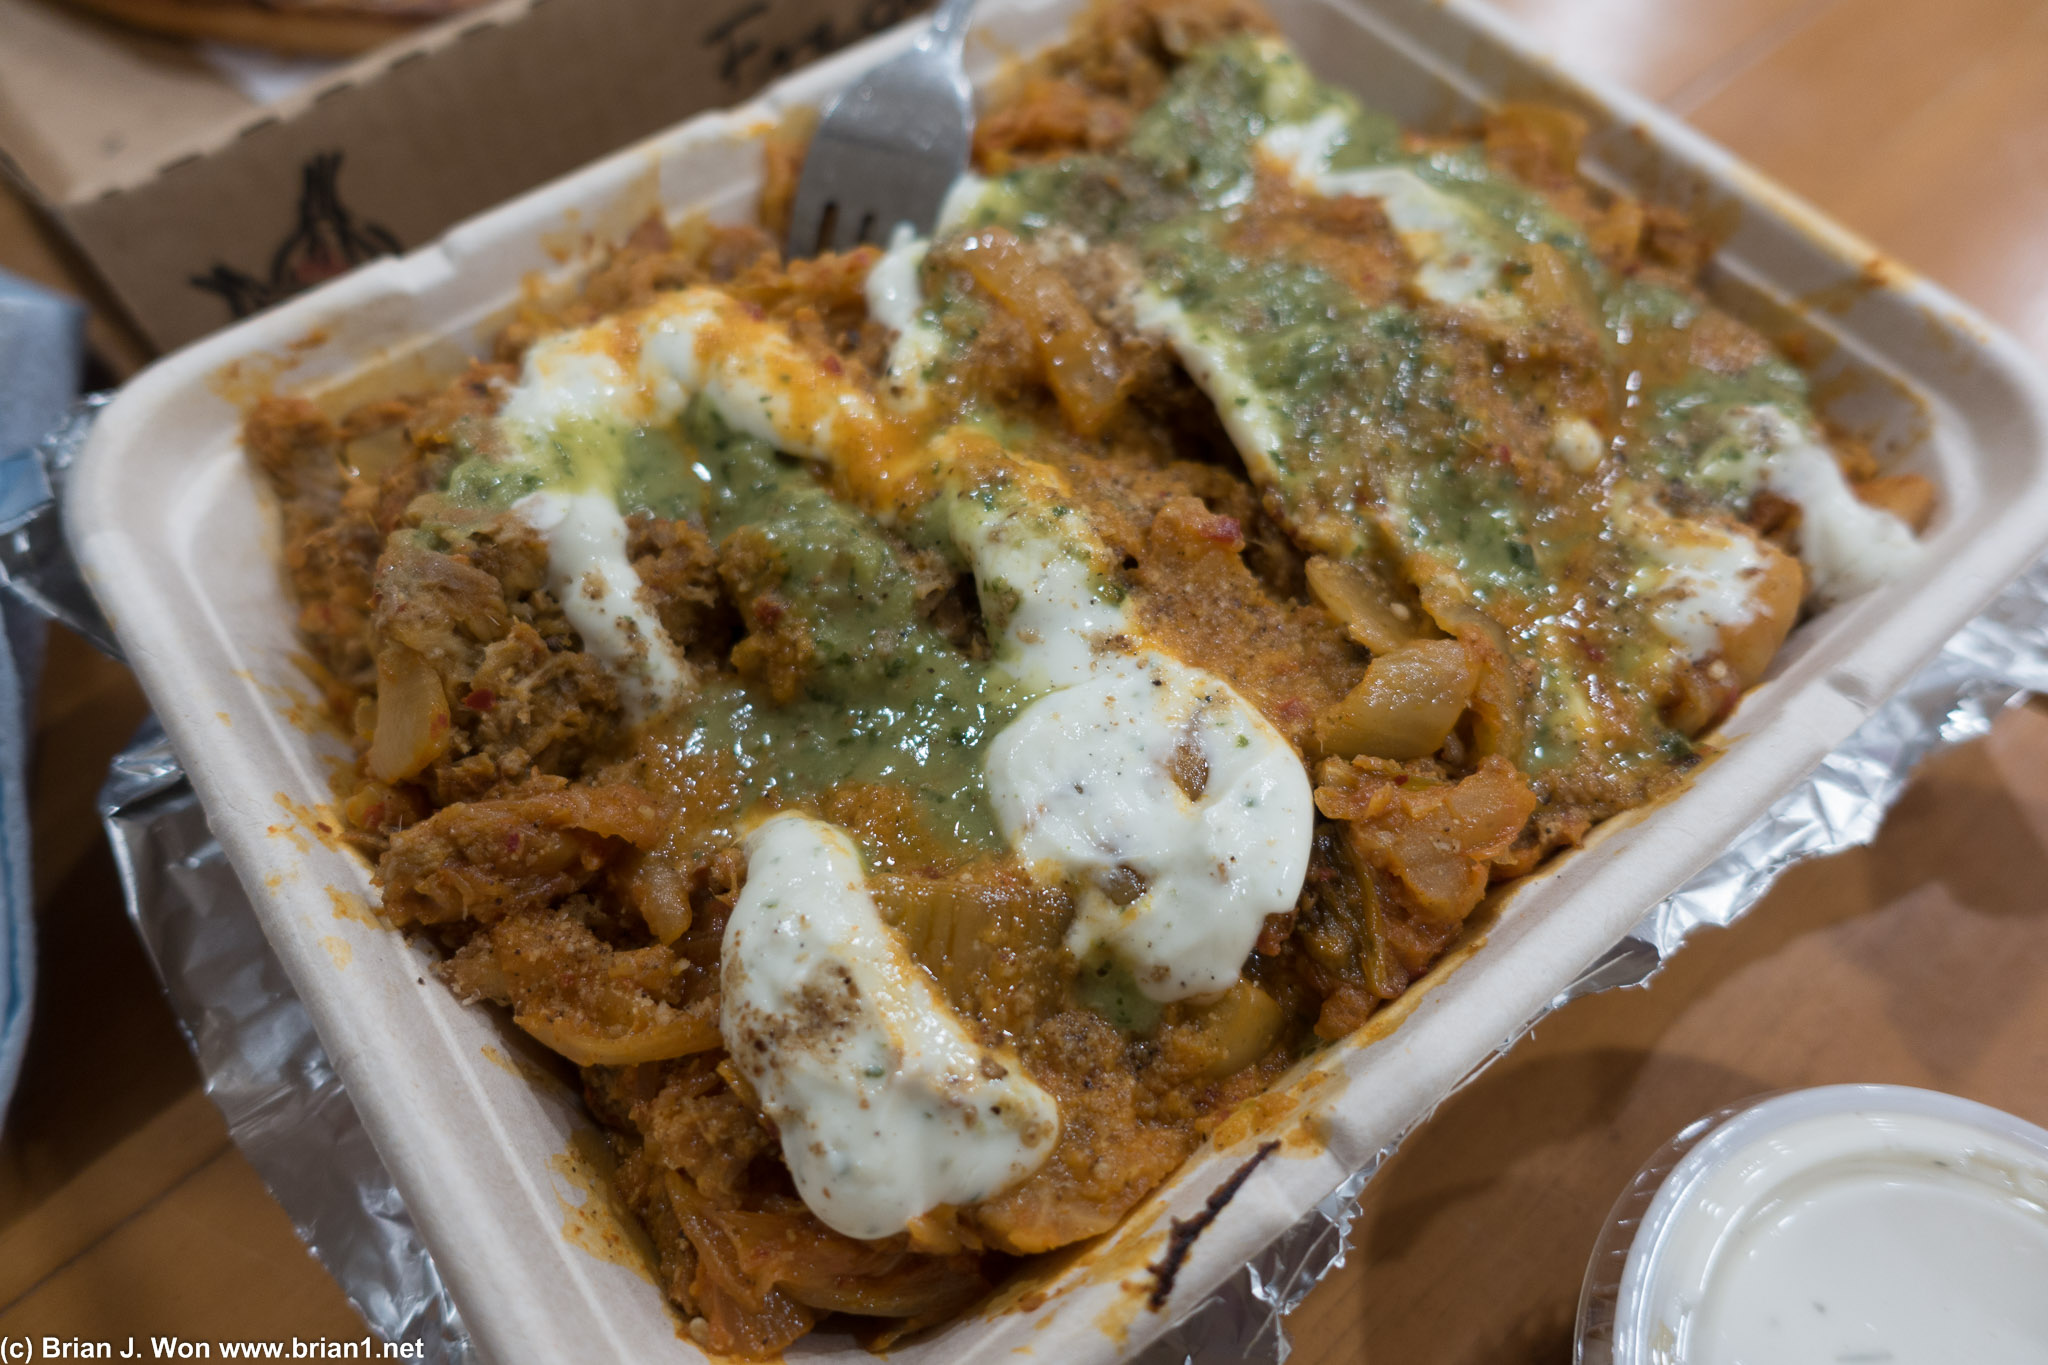 Carnitas kimchi fries. Too much topping, not enough french fry. And it was HUGE.